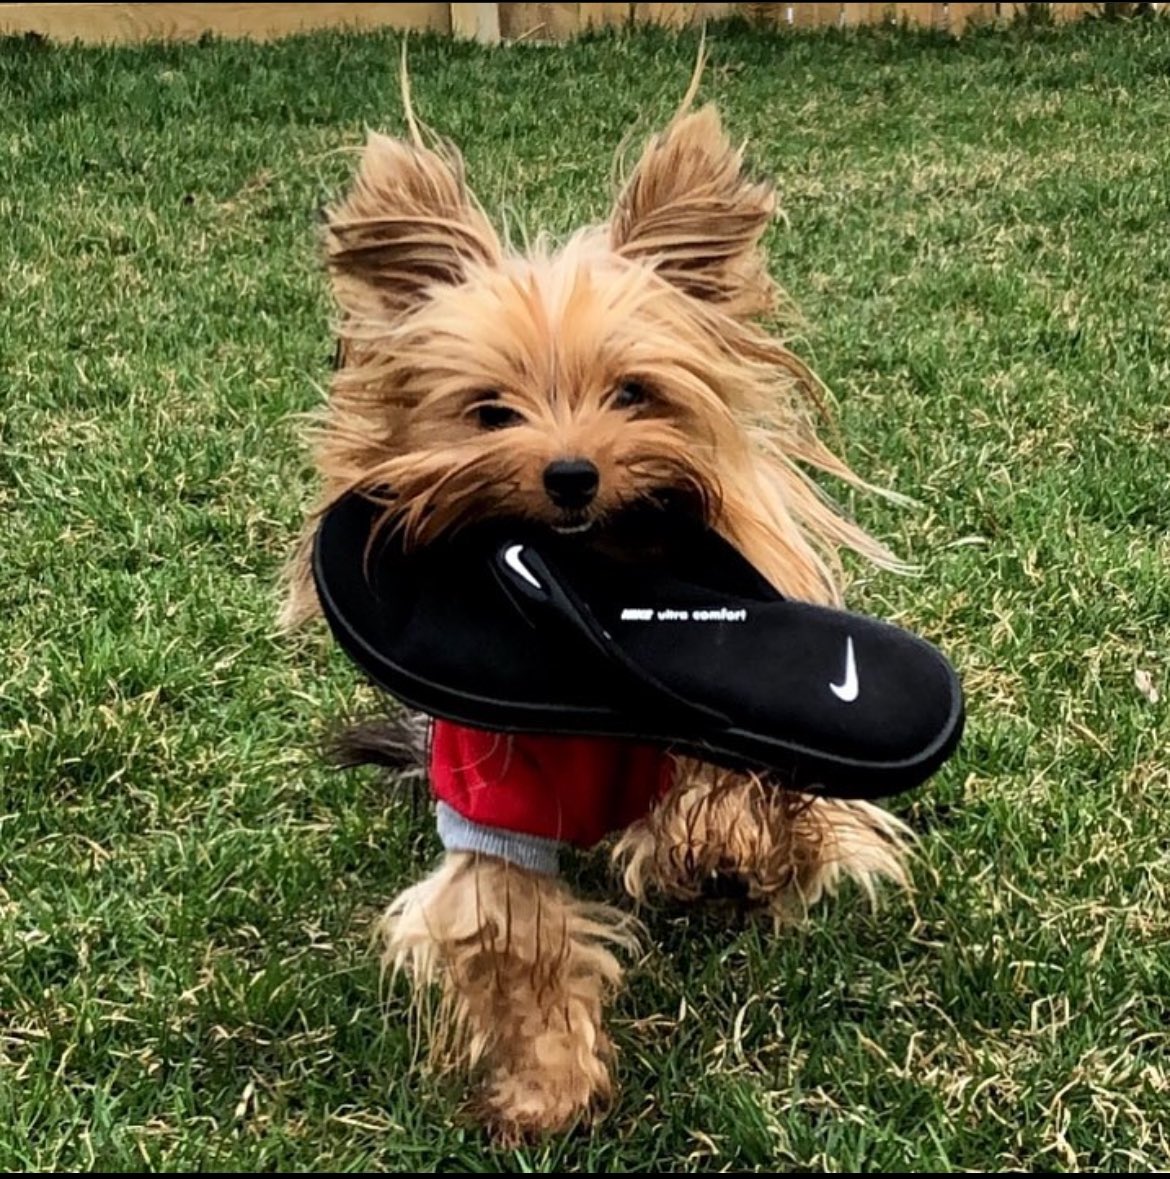 I'm being accused of stealing my humans flip flop which I absolutely did not do! Does anyone know a good lawyer? #Tuesday #cute #love #nike #DogsOfTwitter #DogsOnTwitter #dogsarefamily